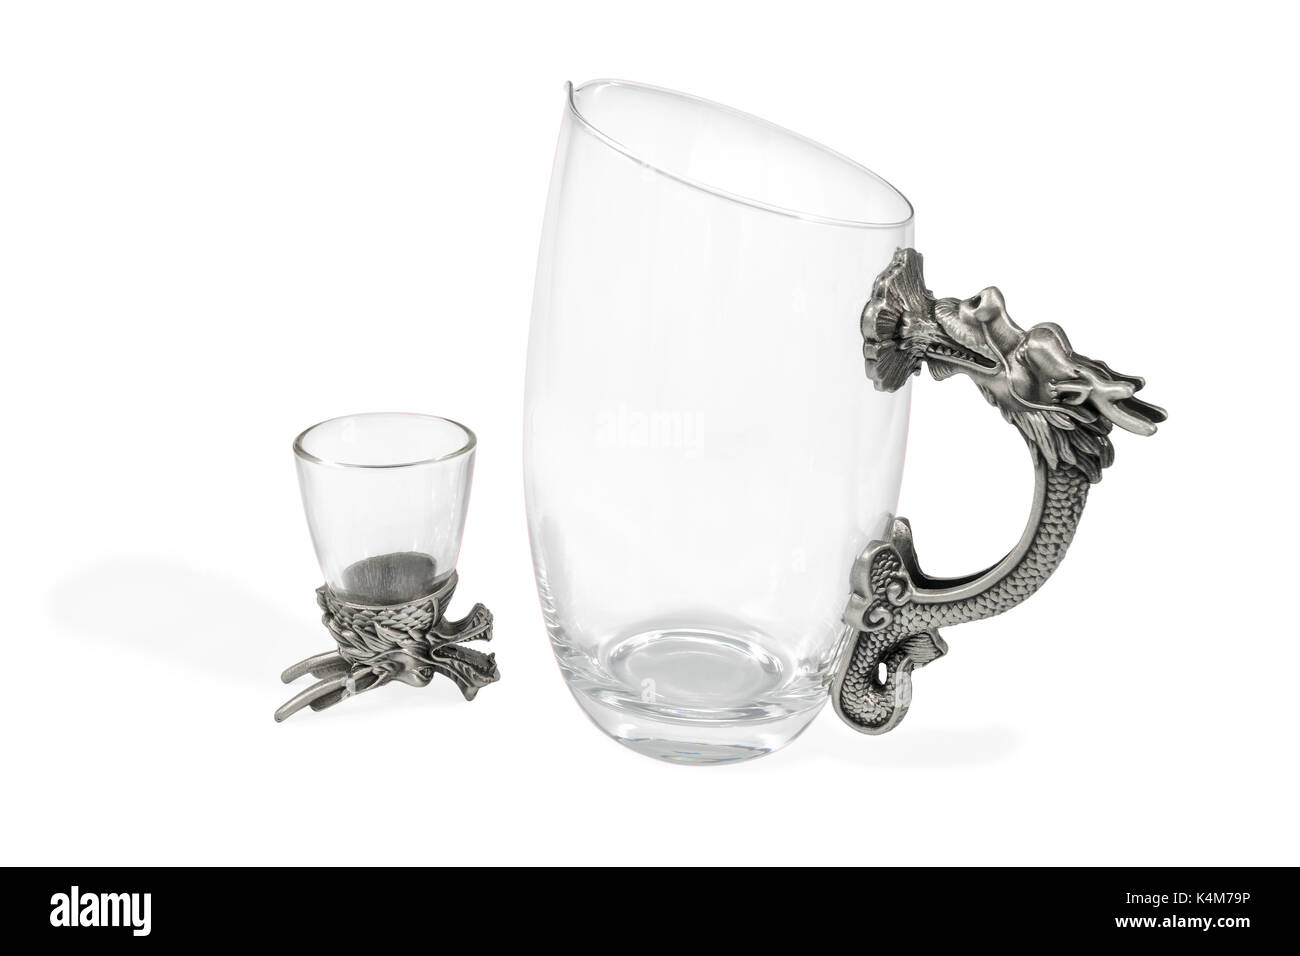 Art set of decanter and wine glasses for vodka with a handle and a bottom in the form of a dragon, isolated on a white background Stock Photo